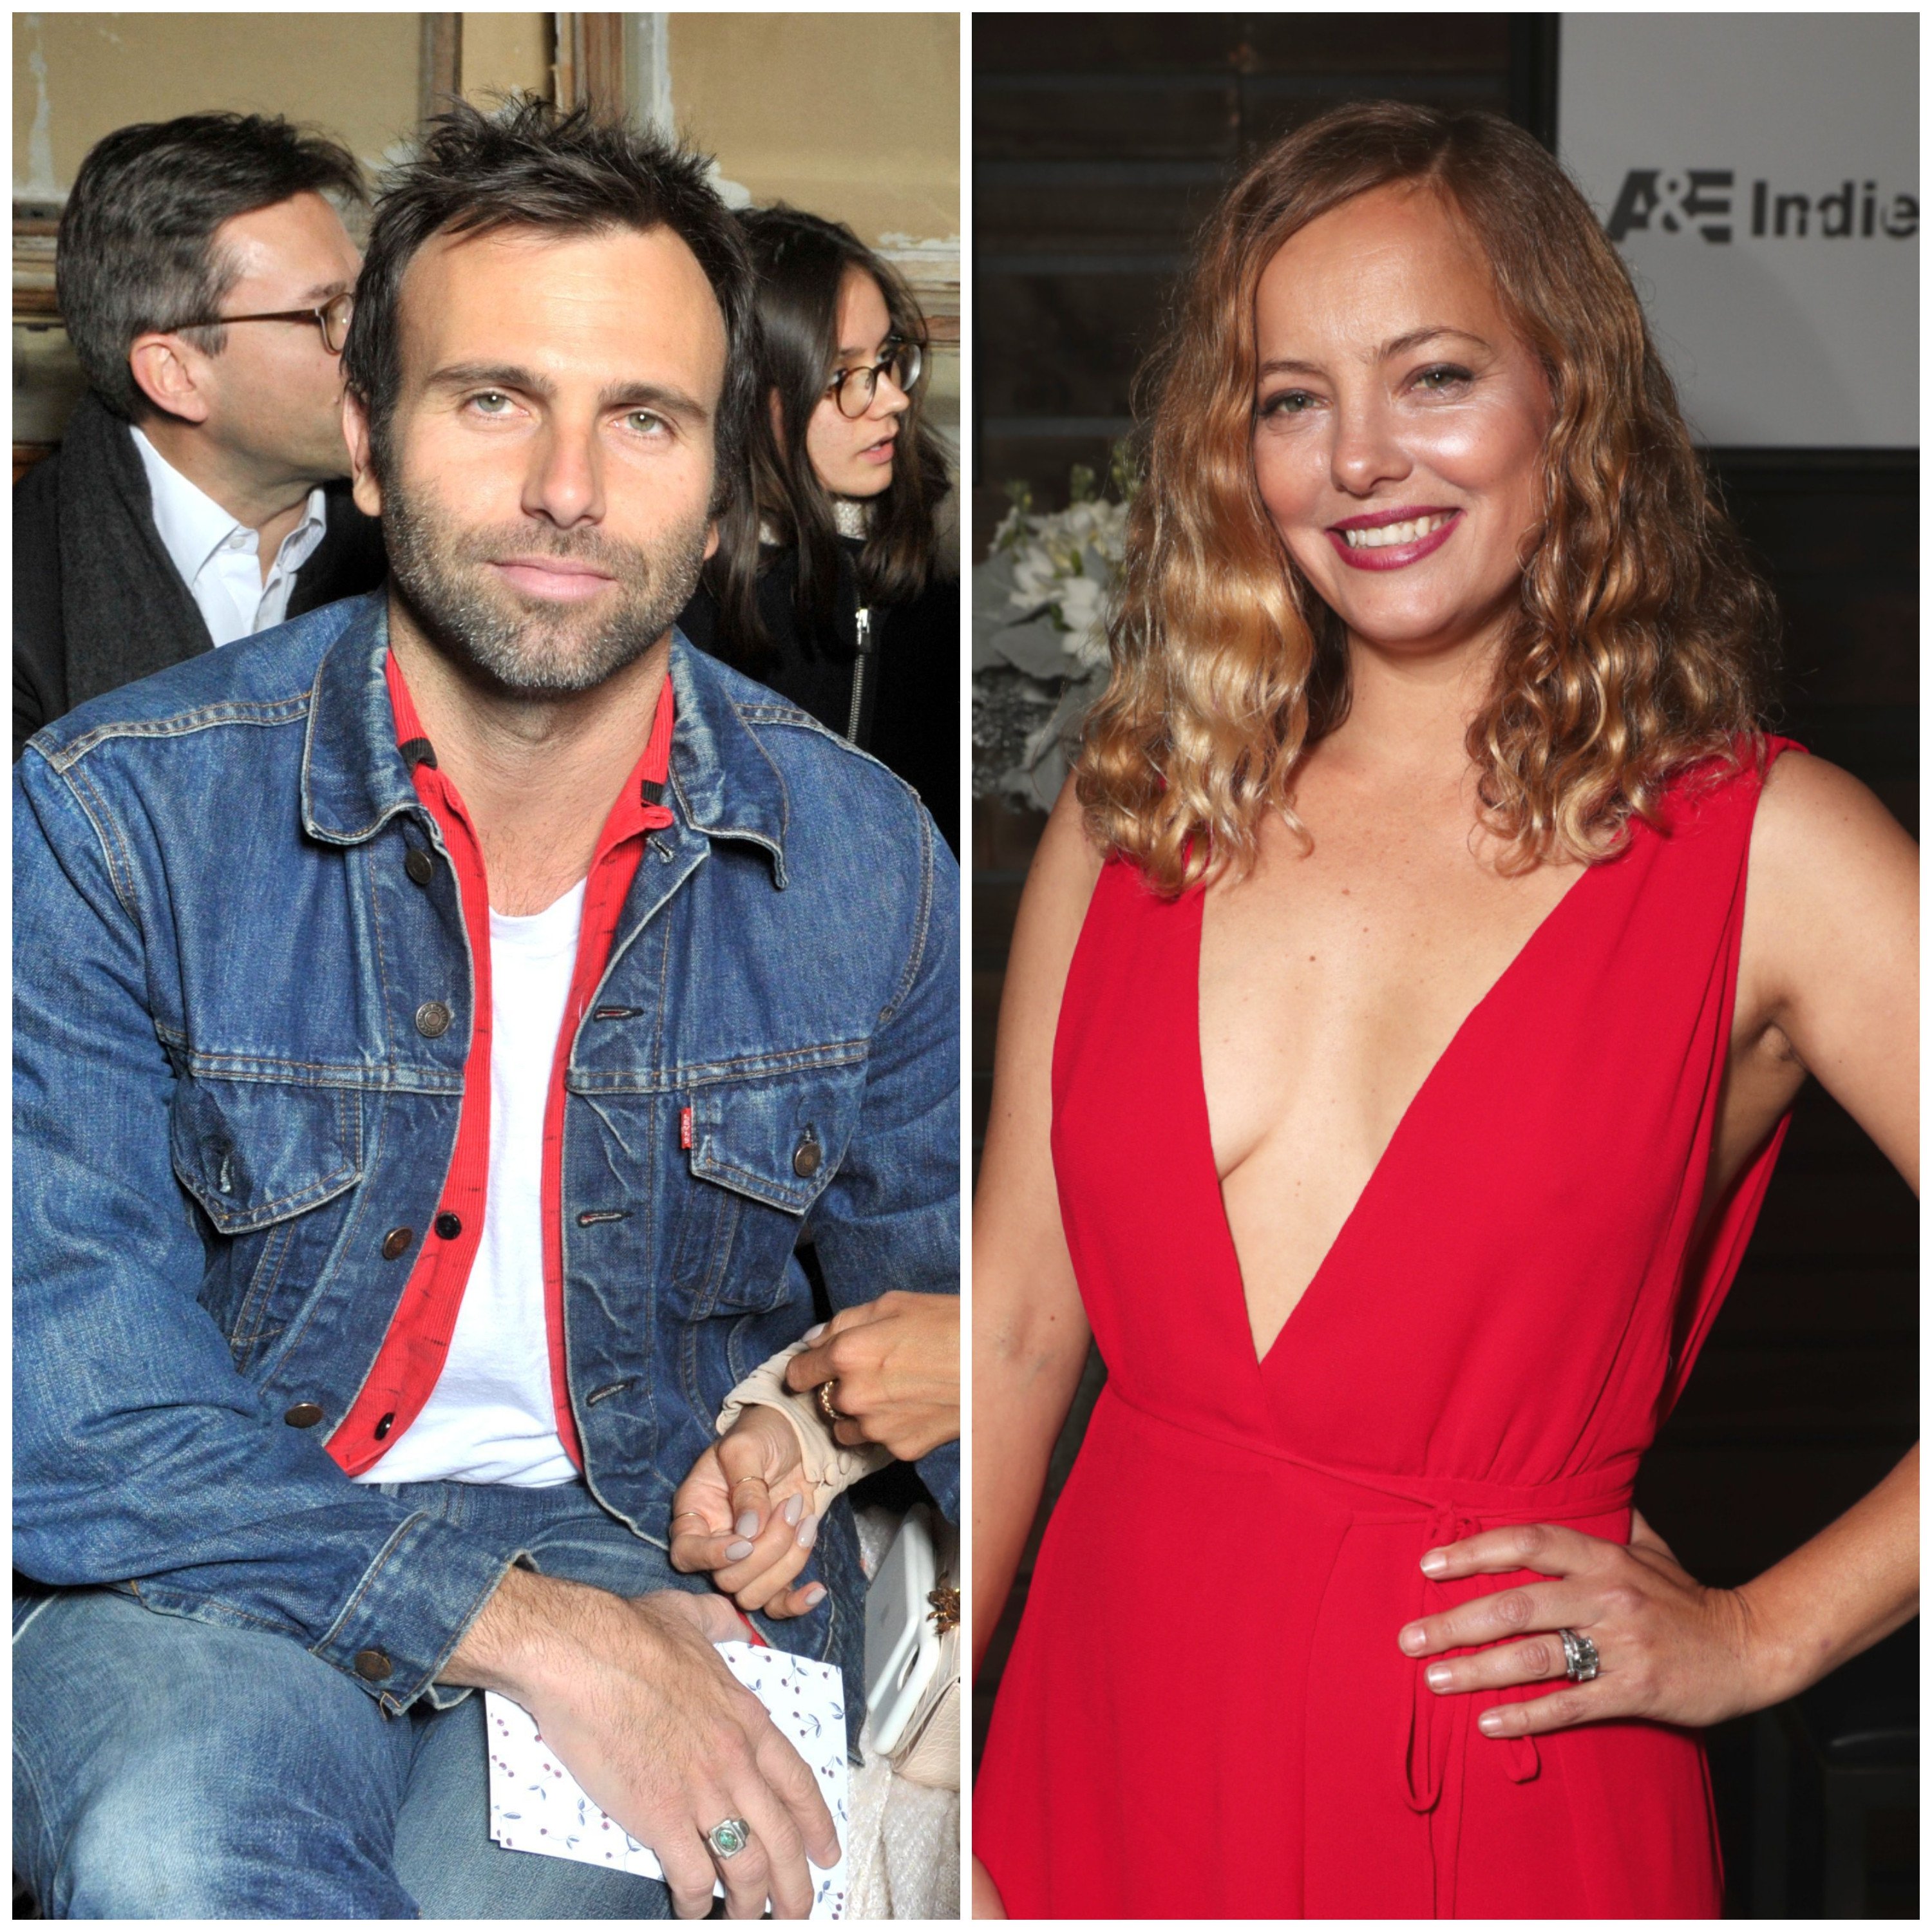 Raising Hope actress Bijou Phillips has moved on since her ex husband was sent to prison – with rugged entrepreneur Jamie Mazur. Photos: Getty Images